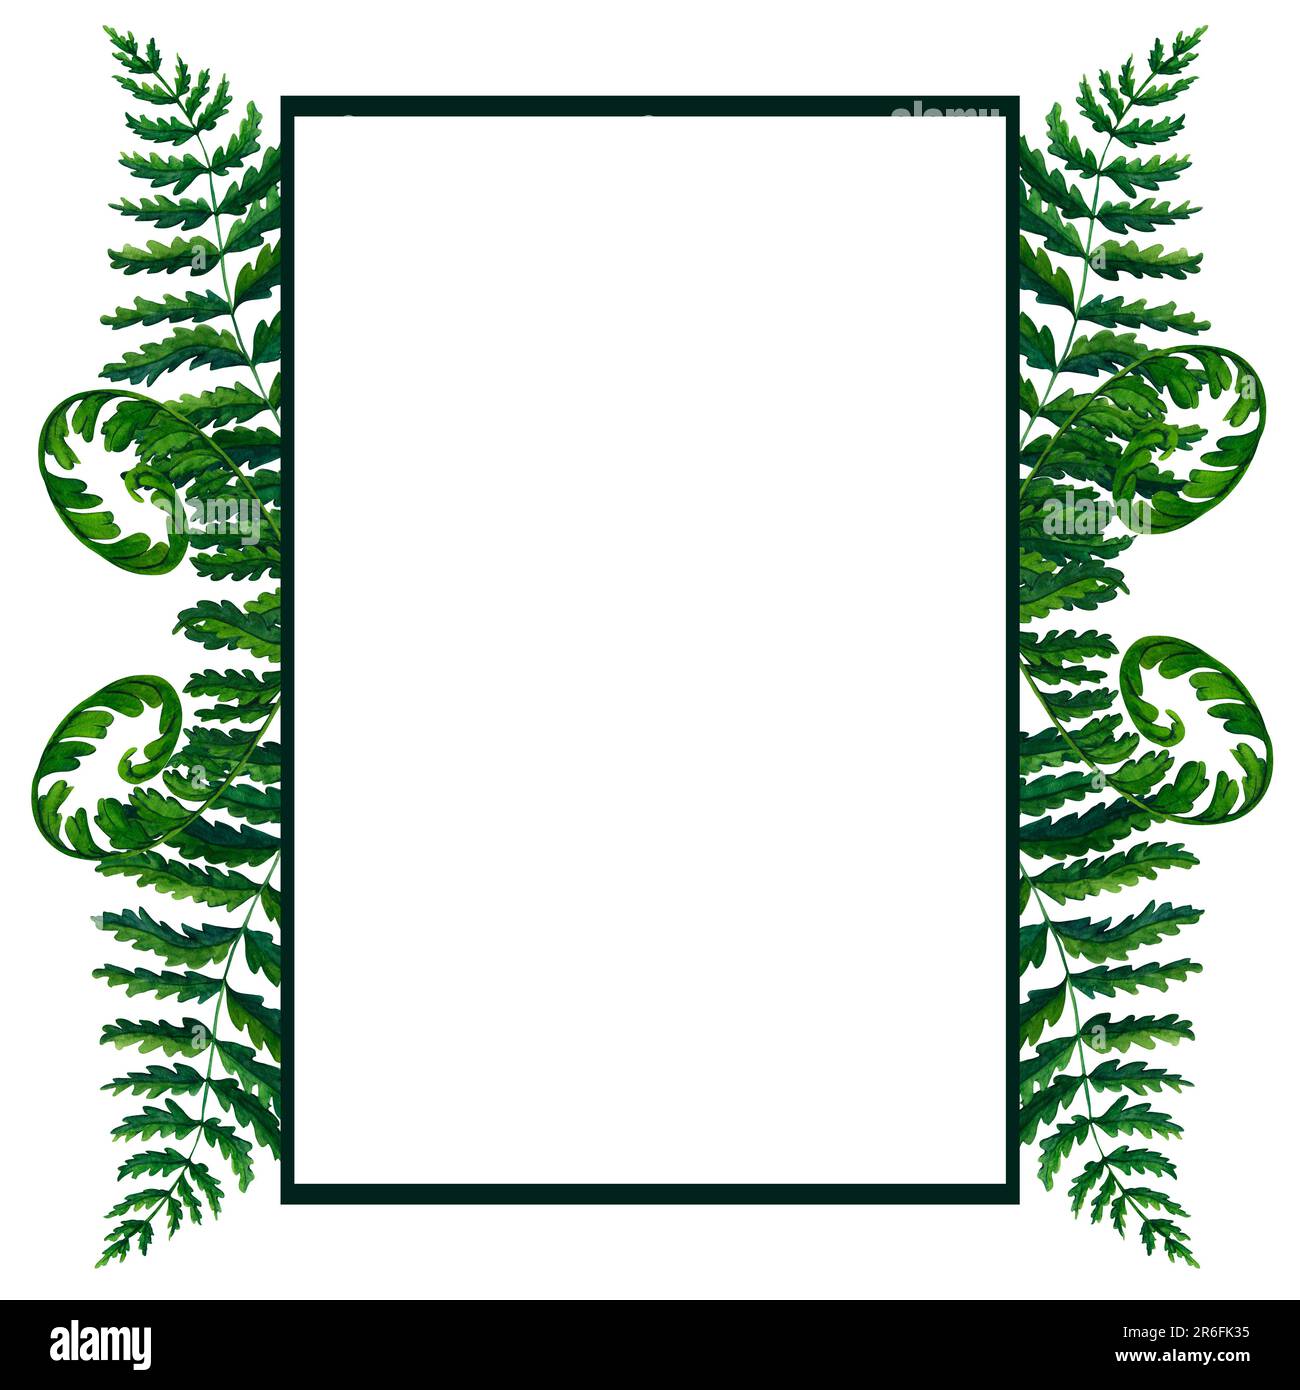 Frame with fern watercolor hand painted illustration in green colors, greenery branch, twig, stem, forest plant isolated on white background for wall Stock Photo